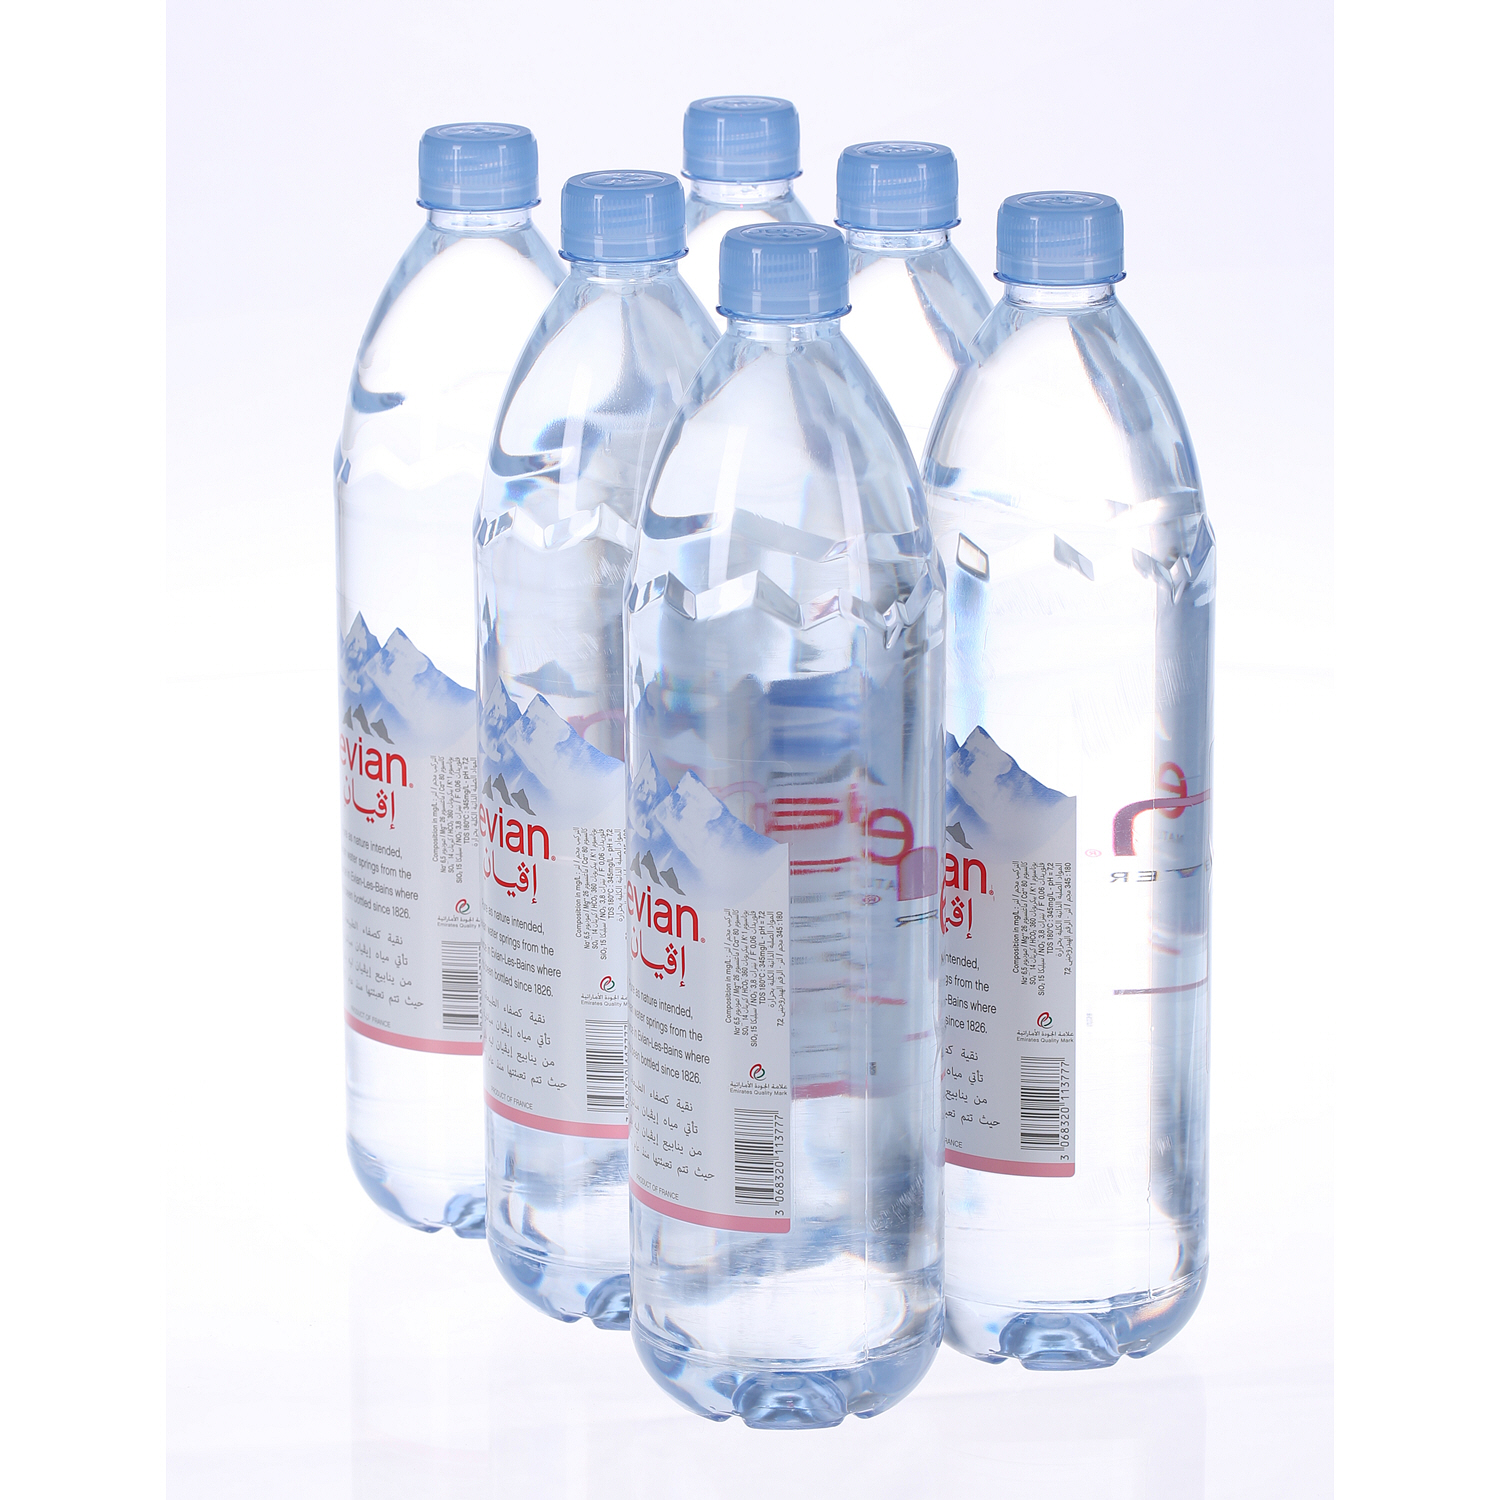 Evian Mineral Water 1.5Ltr X 6'S